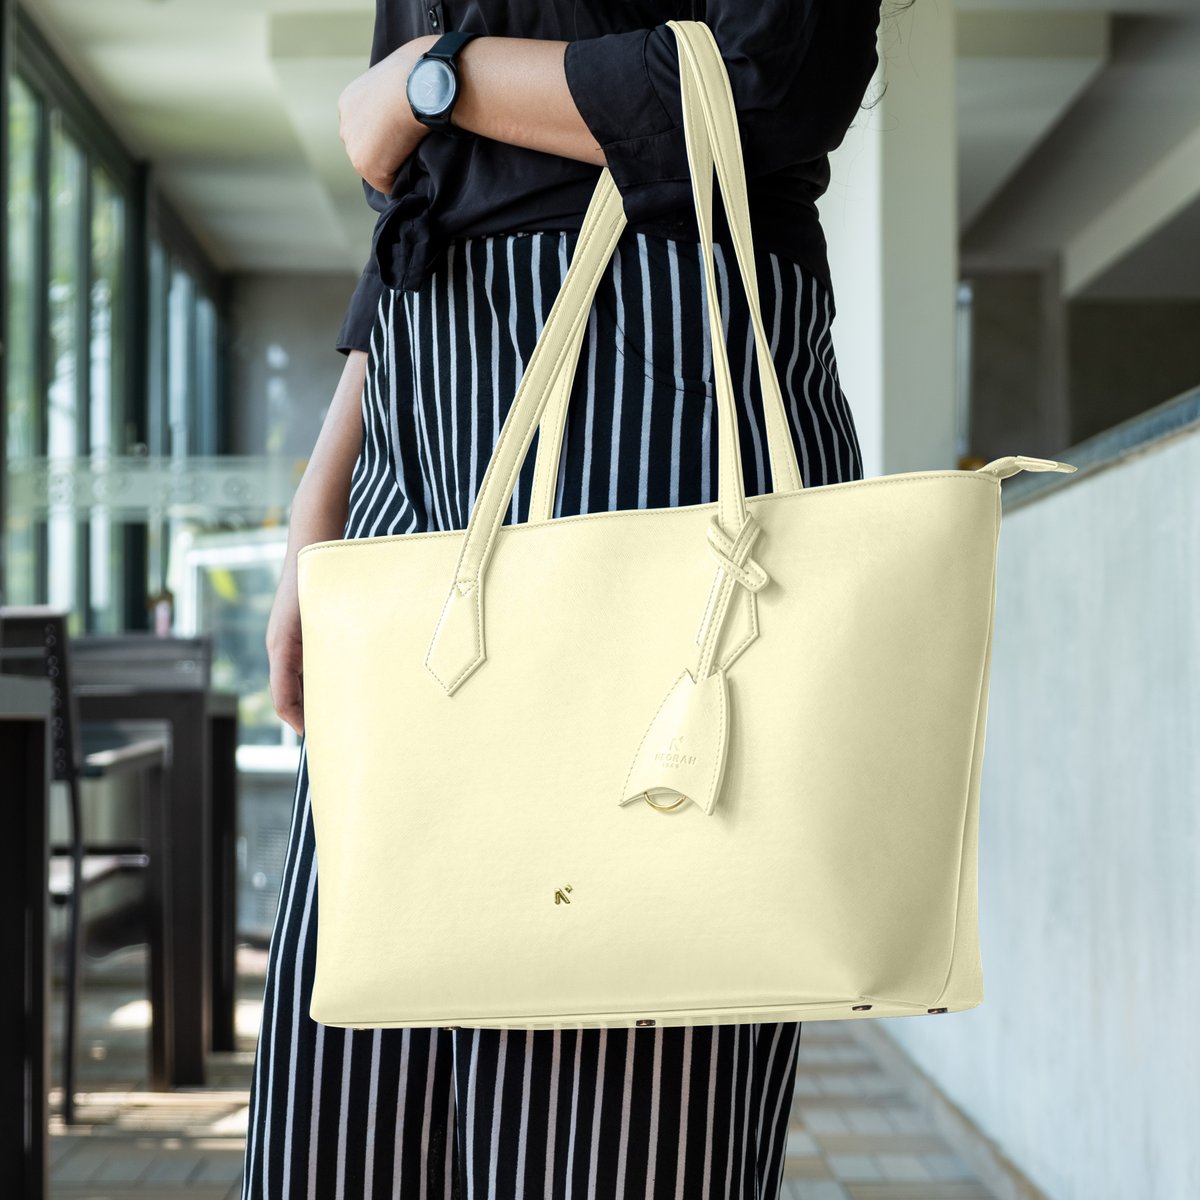 Carry your dreams, aspirations, and essentials with this empowering women's tote bag👜

atelierneorah.com/collections/to…
Tote Bags For Women

#neorah #totebags #bagsforstyle #fashionablebags #feelcomfortable #leathermade #personalizedbags #womenstyle #totebagtrend #stylishtote